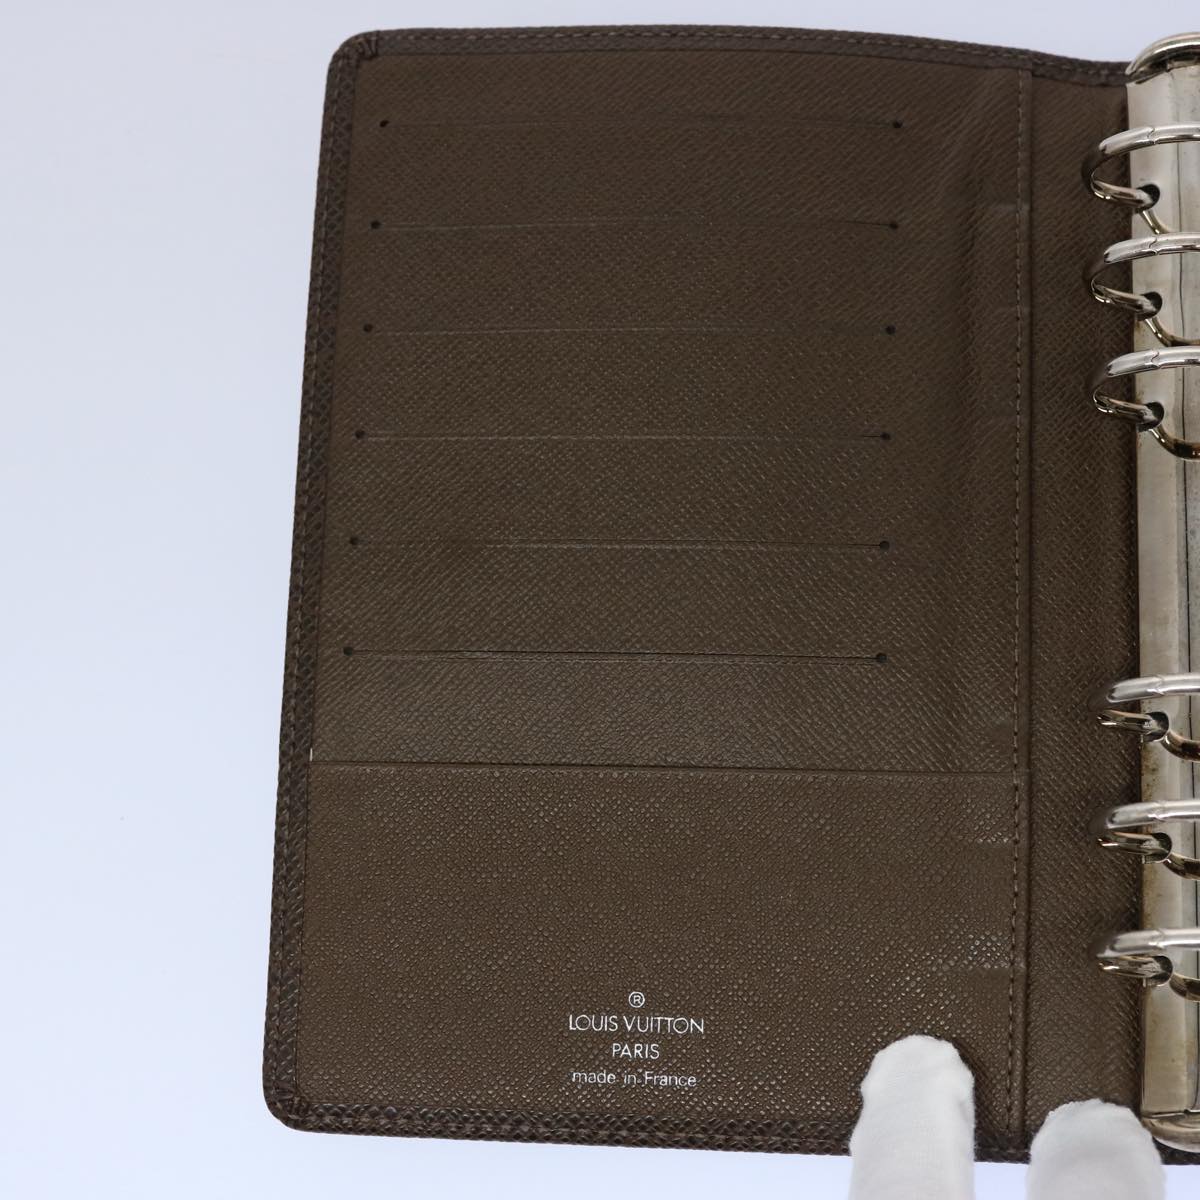 LOUIS VUITTON Taiga Agenda MM Day Planner Cover Grizzly R20426 LV Auth ar11017